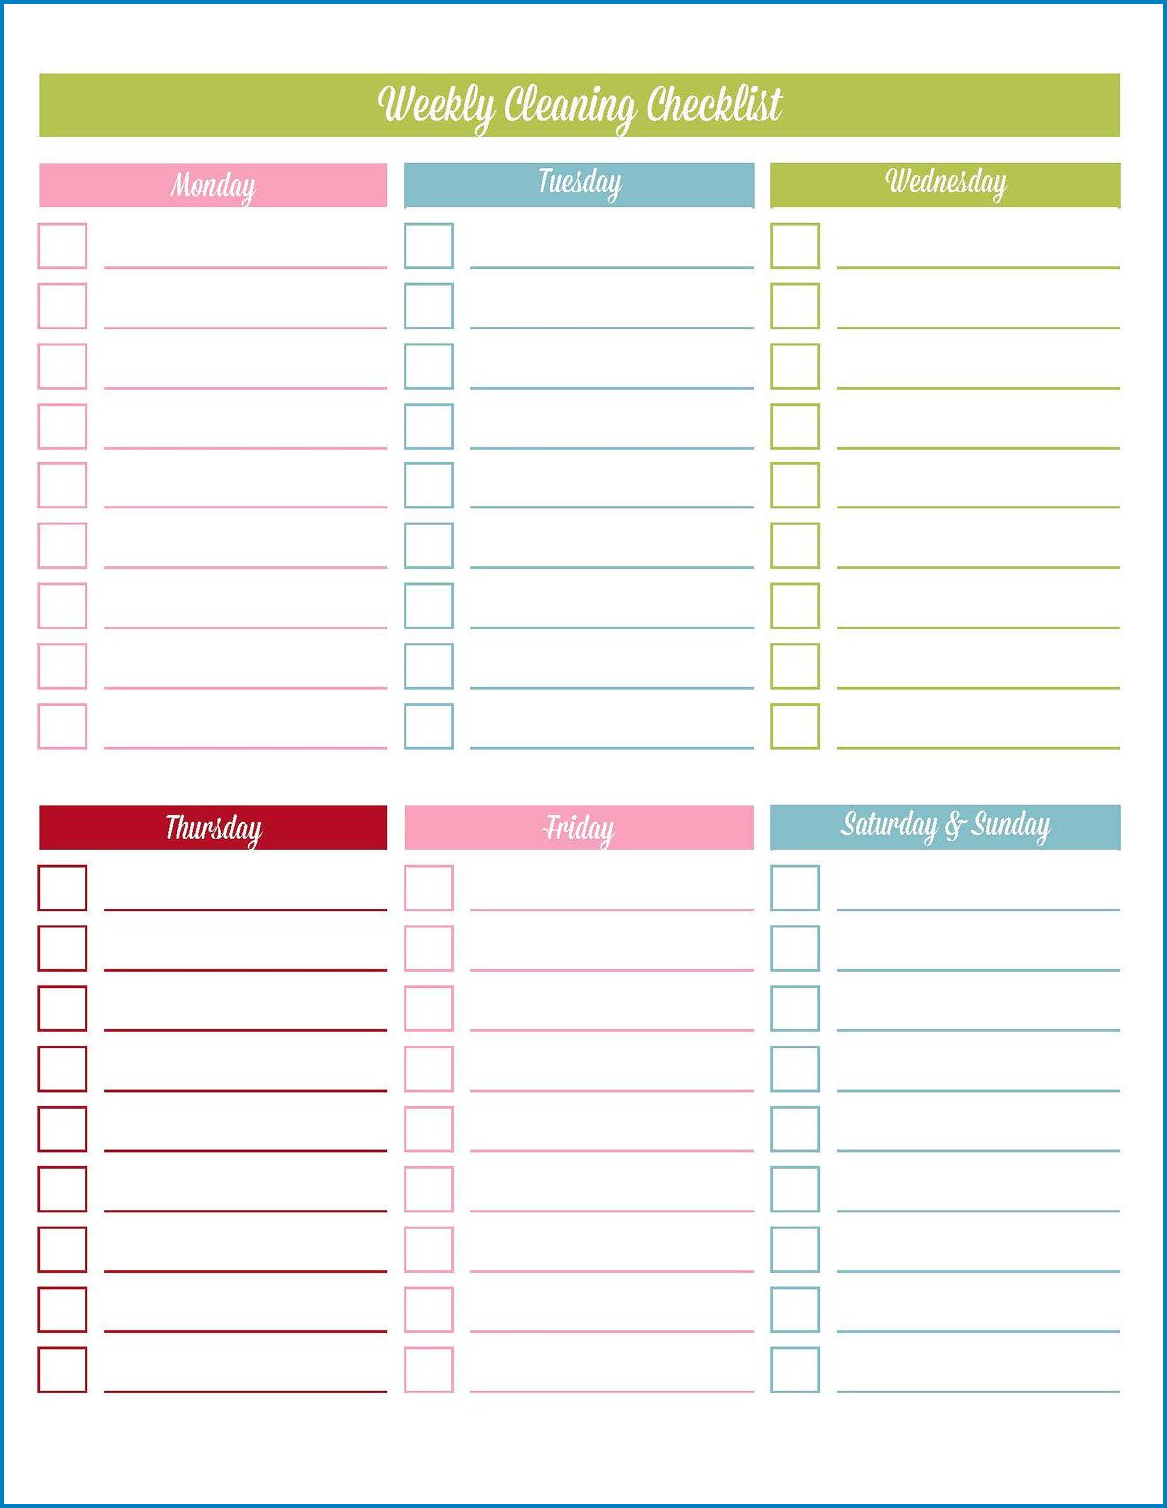 Example of Weekly Checklist Template